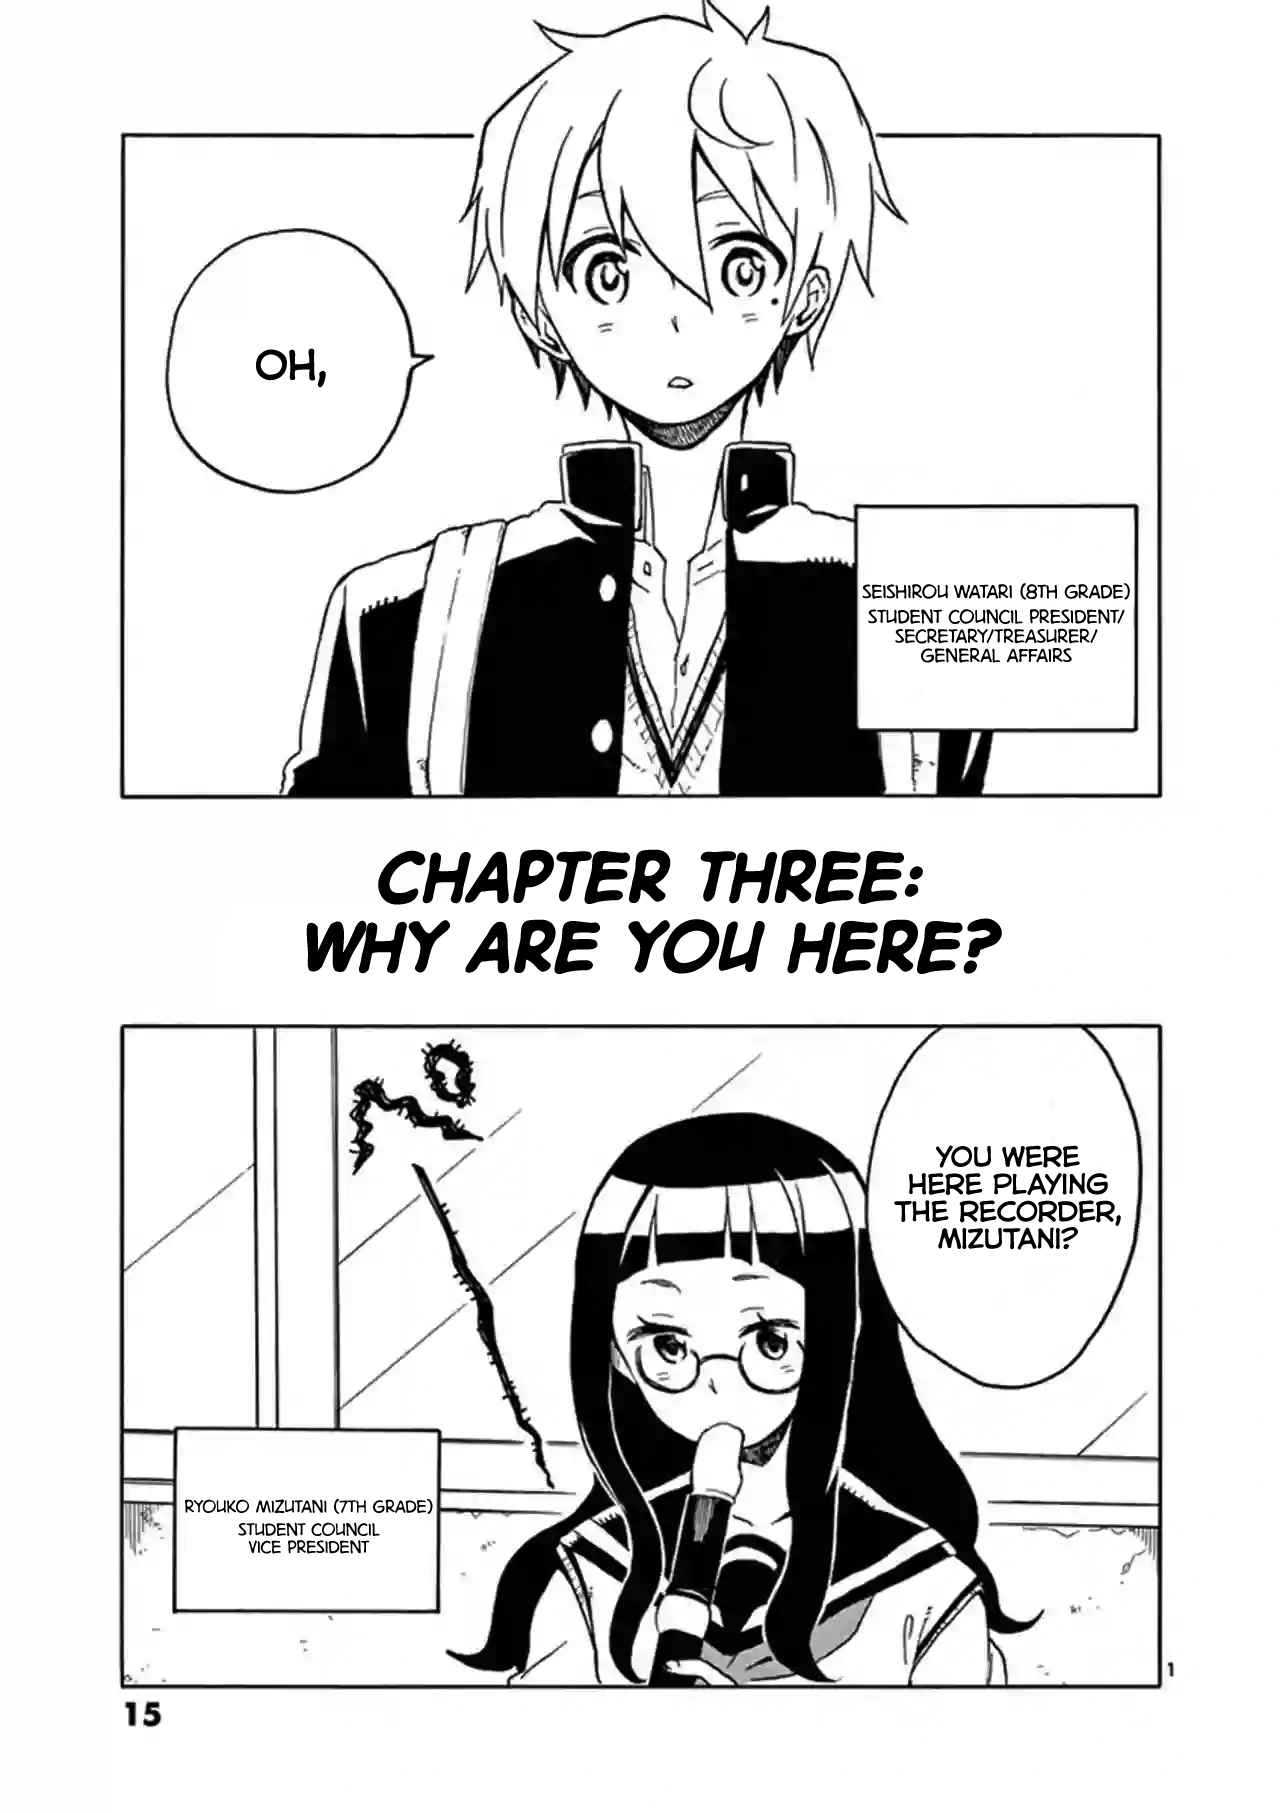 Student Council for Two Vol. 1 Ch. 3 Why Are You Here?